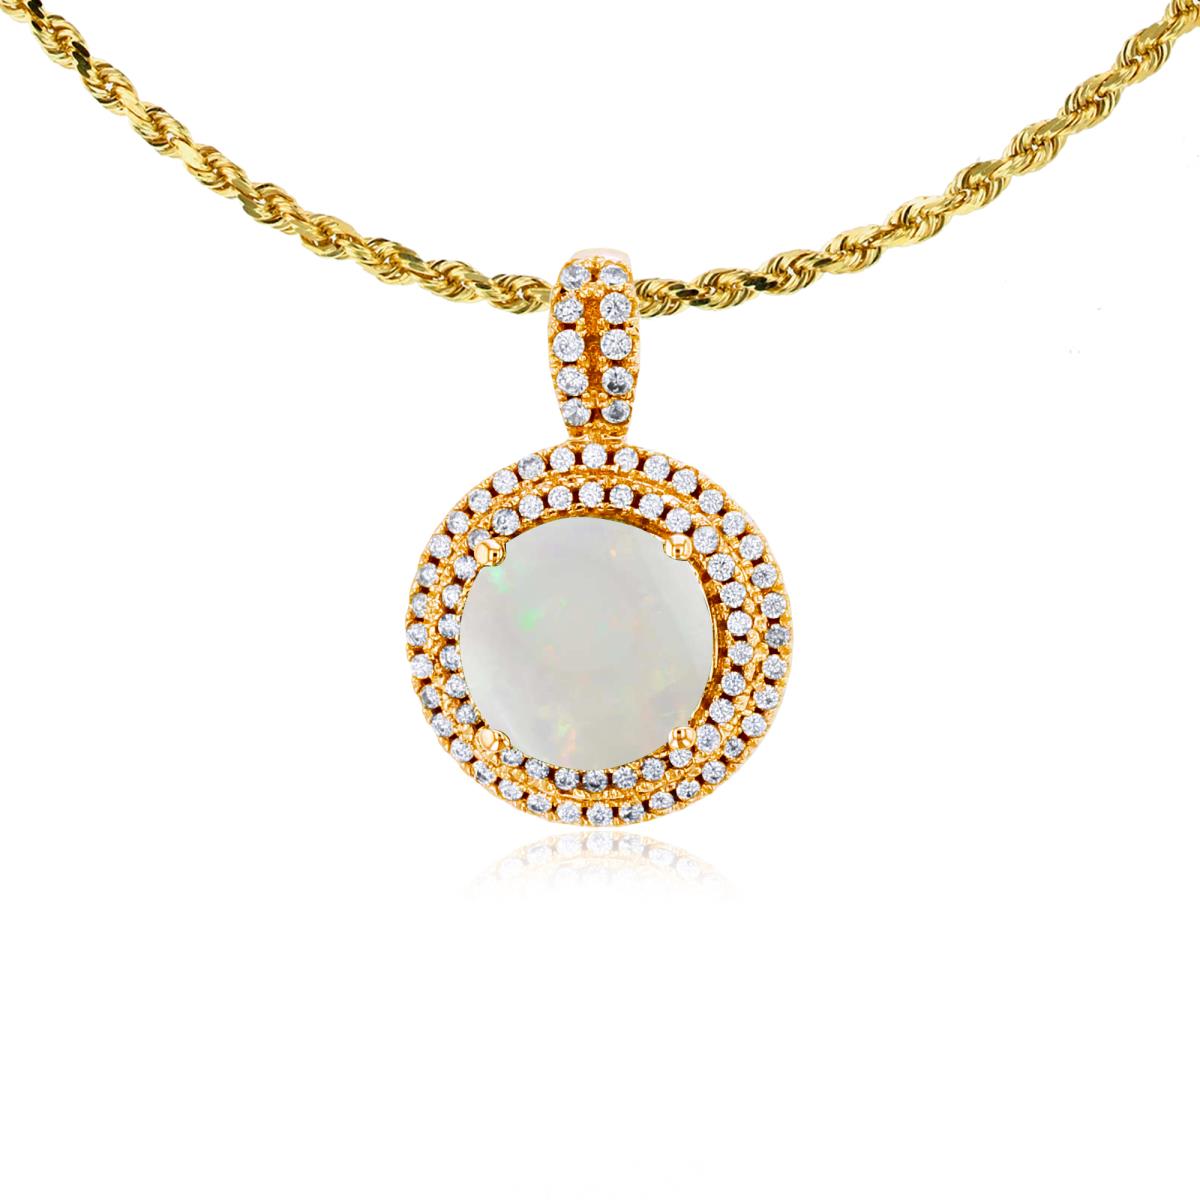 10K Yellow Gold 7mm Round Opal & 0.25 CTTW Diamonds Double Halo 18" Rope Chain Necklace